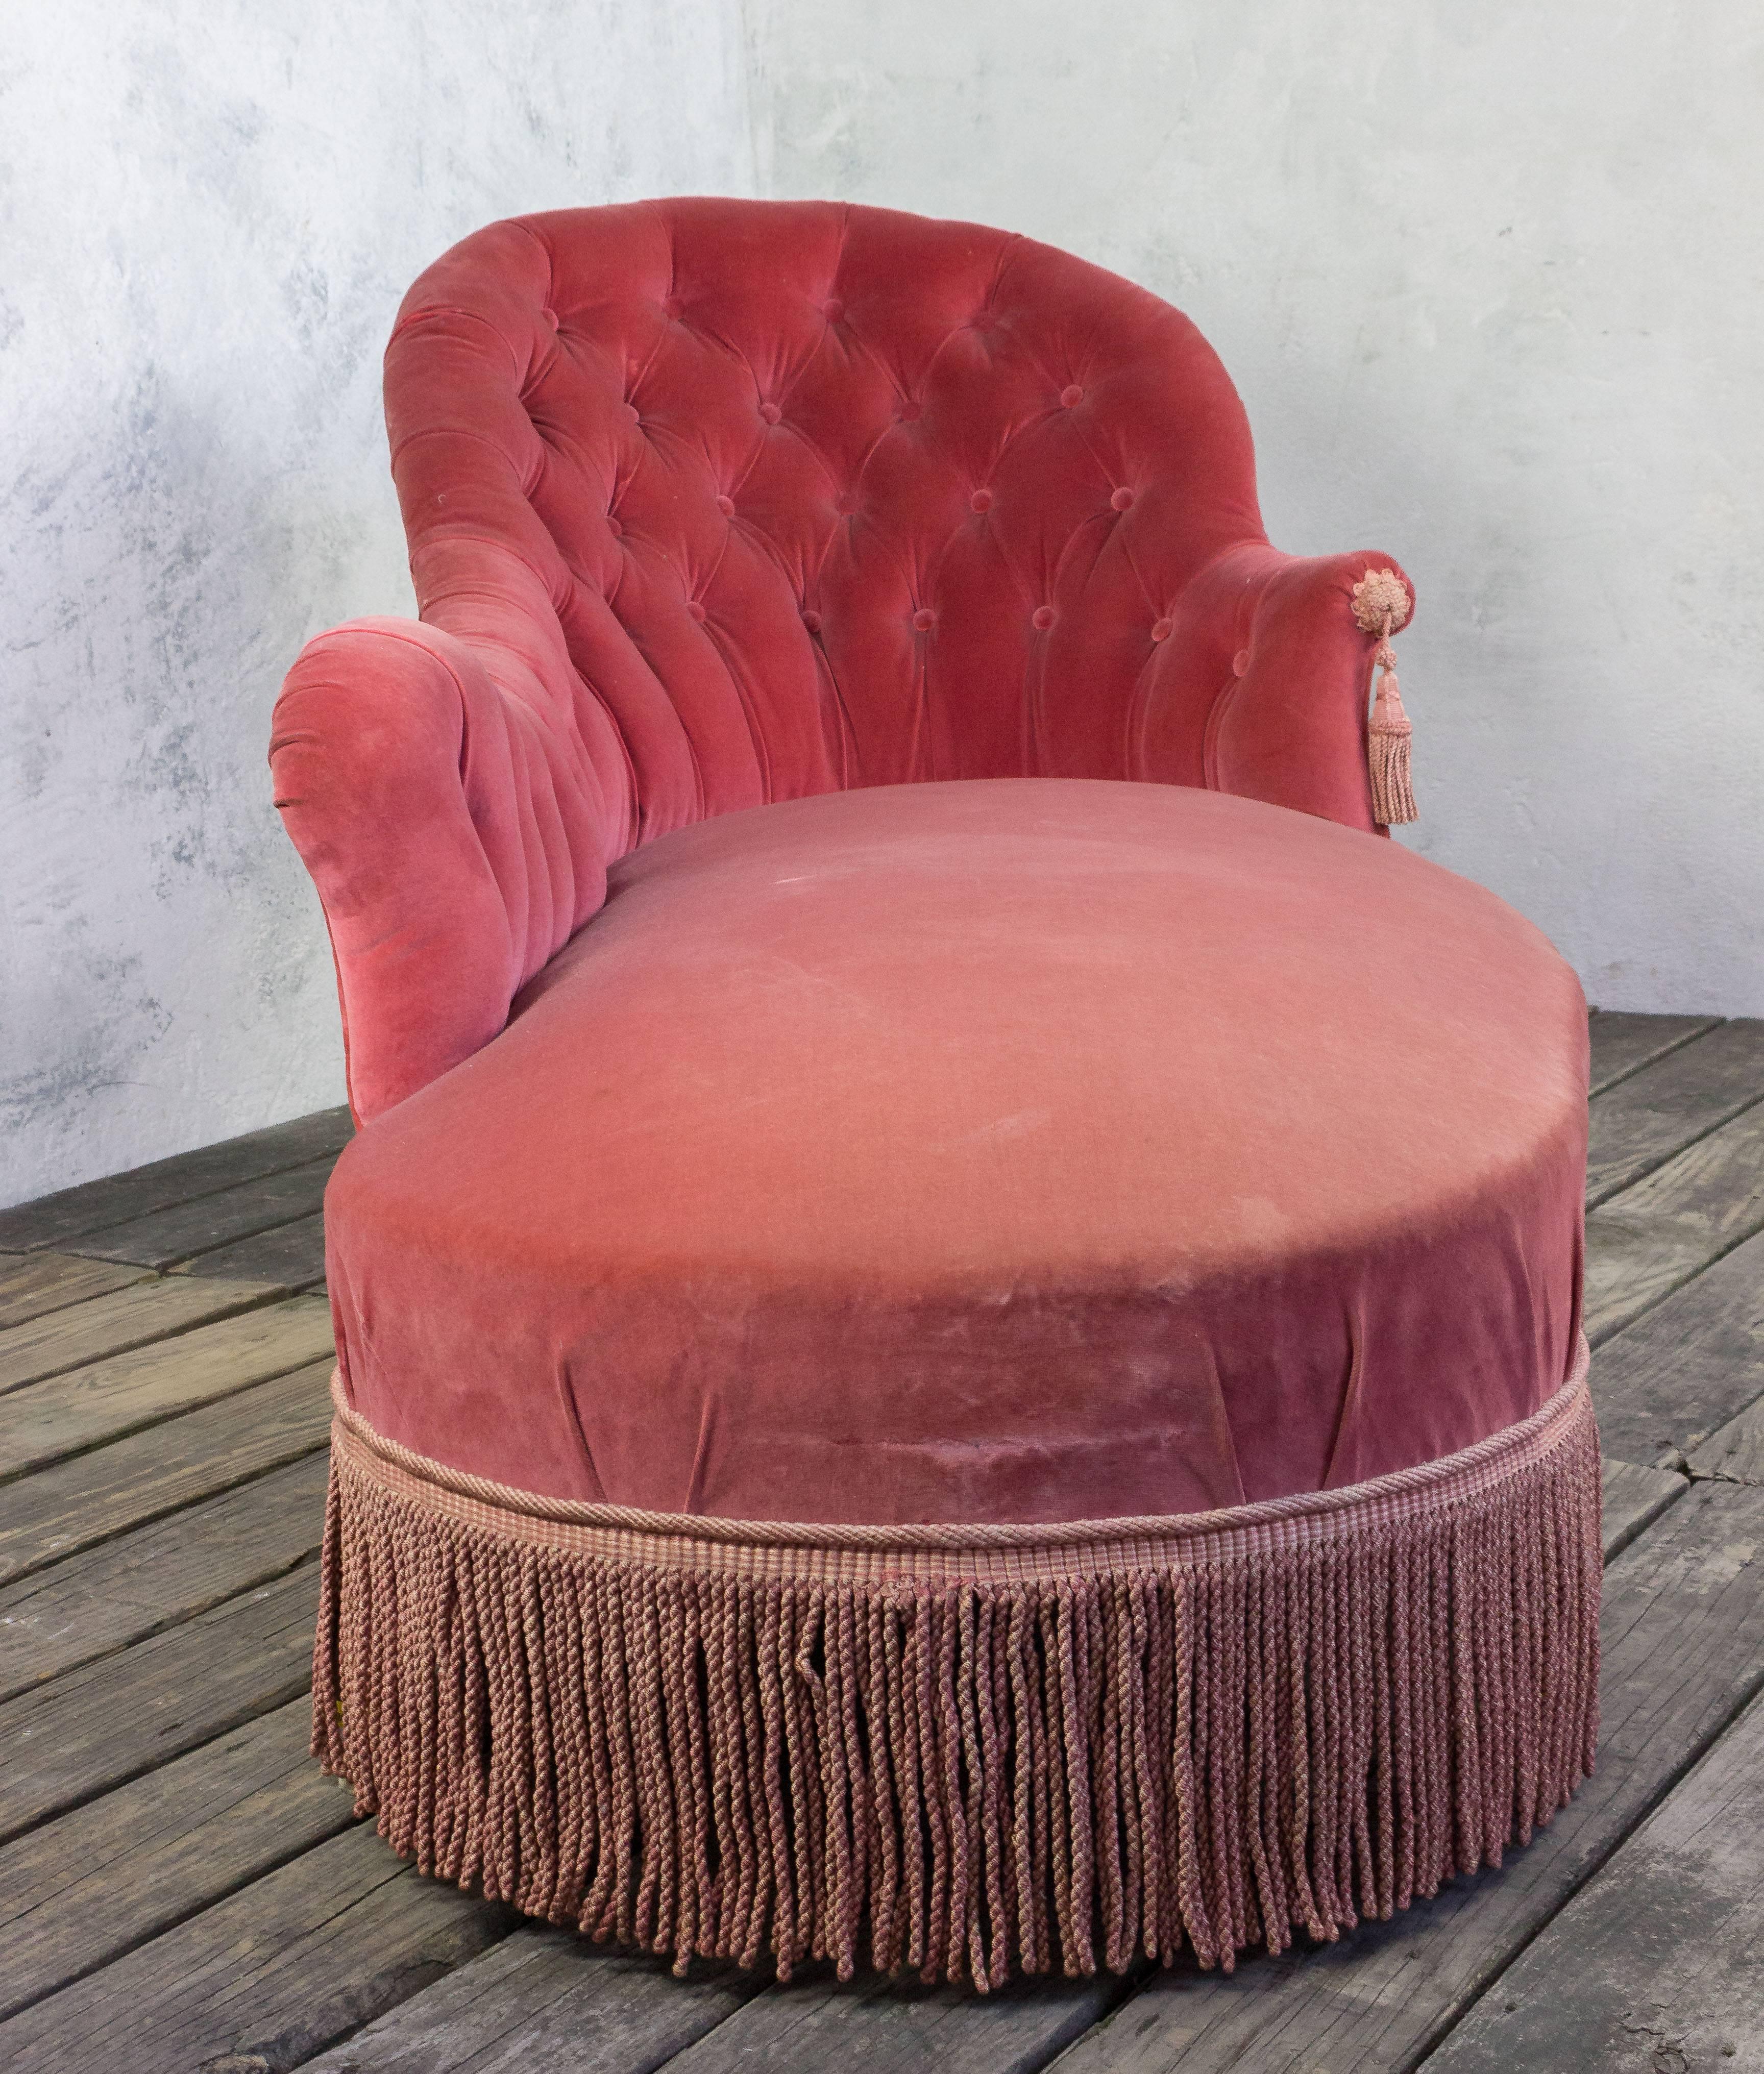 An asymmetrical (right arm) tufted French chaise longue, upholstered in salmon colored velvet with matching bullion fringe. 

.